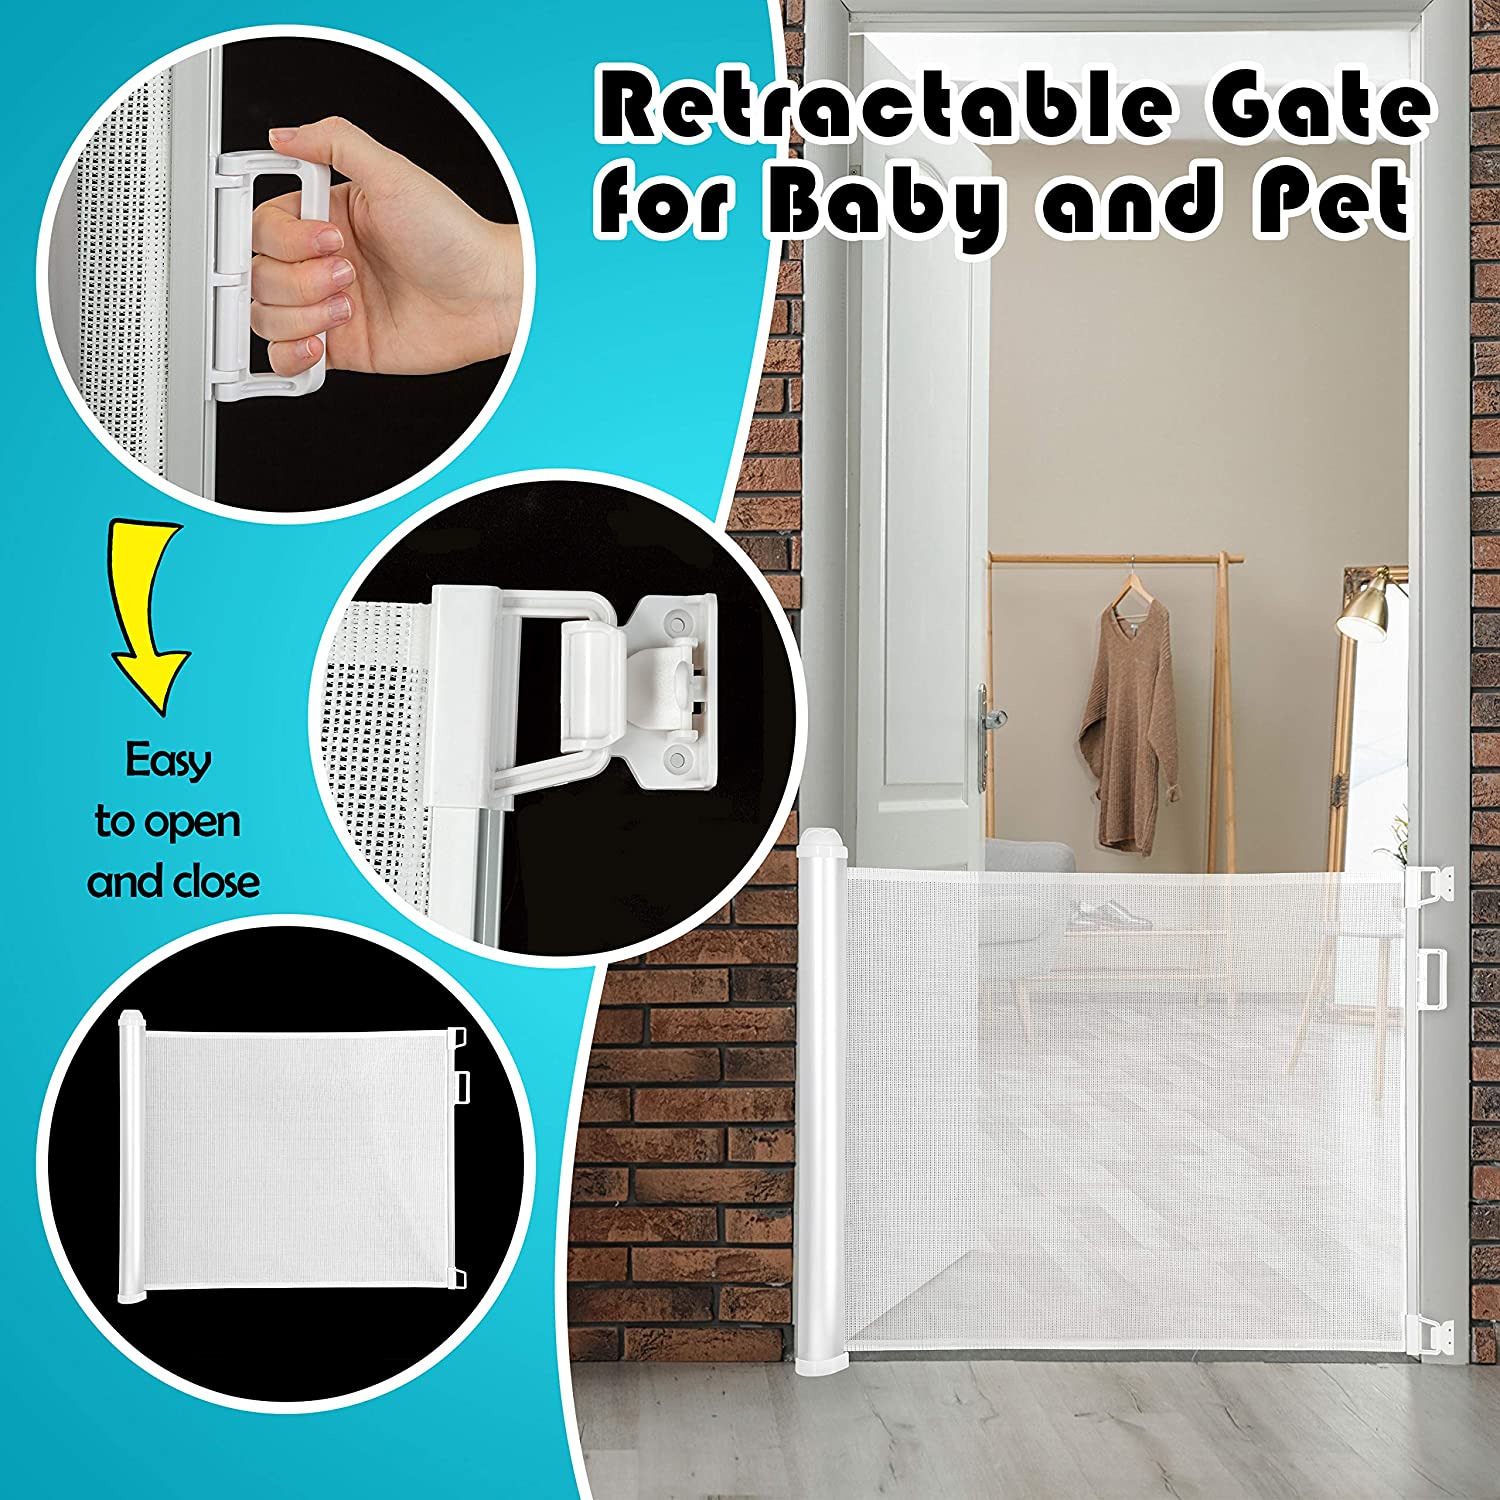 New Retractable Baby Gate - Wide Mesh Safety Pet Gate (Up to 51 Inches) for Children, Dogs for Stairs, Doorways, Stairways, Indoor and Outdoor Use.